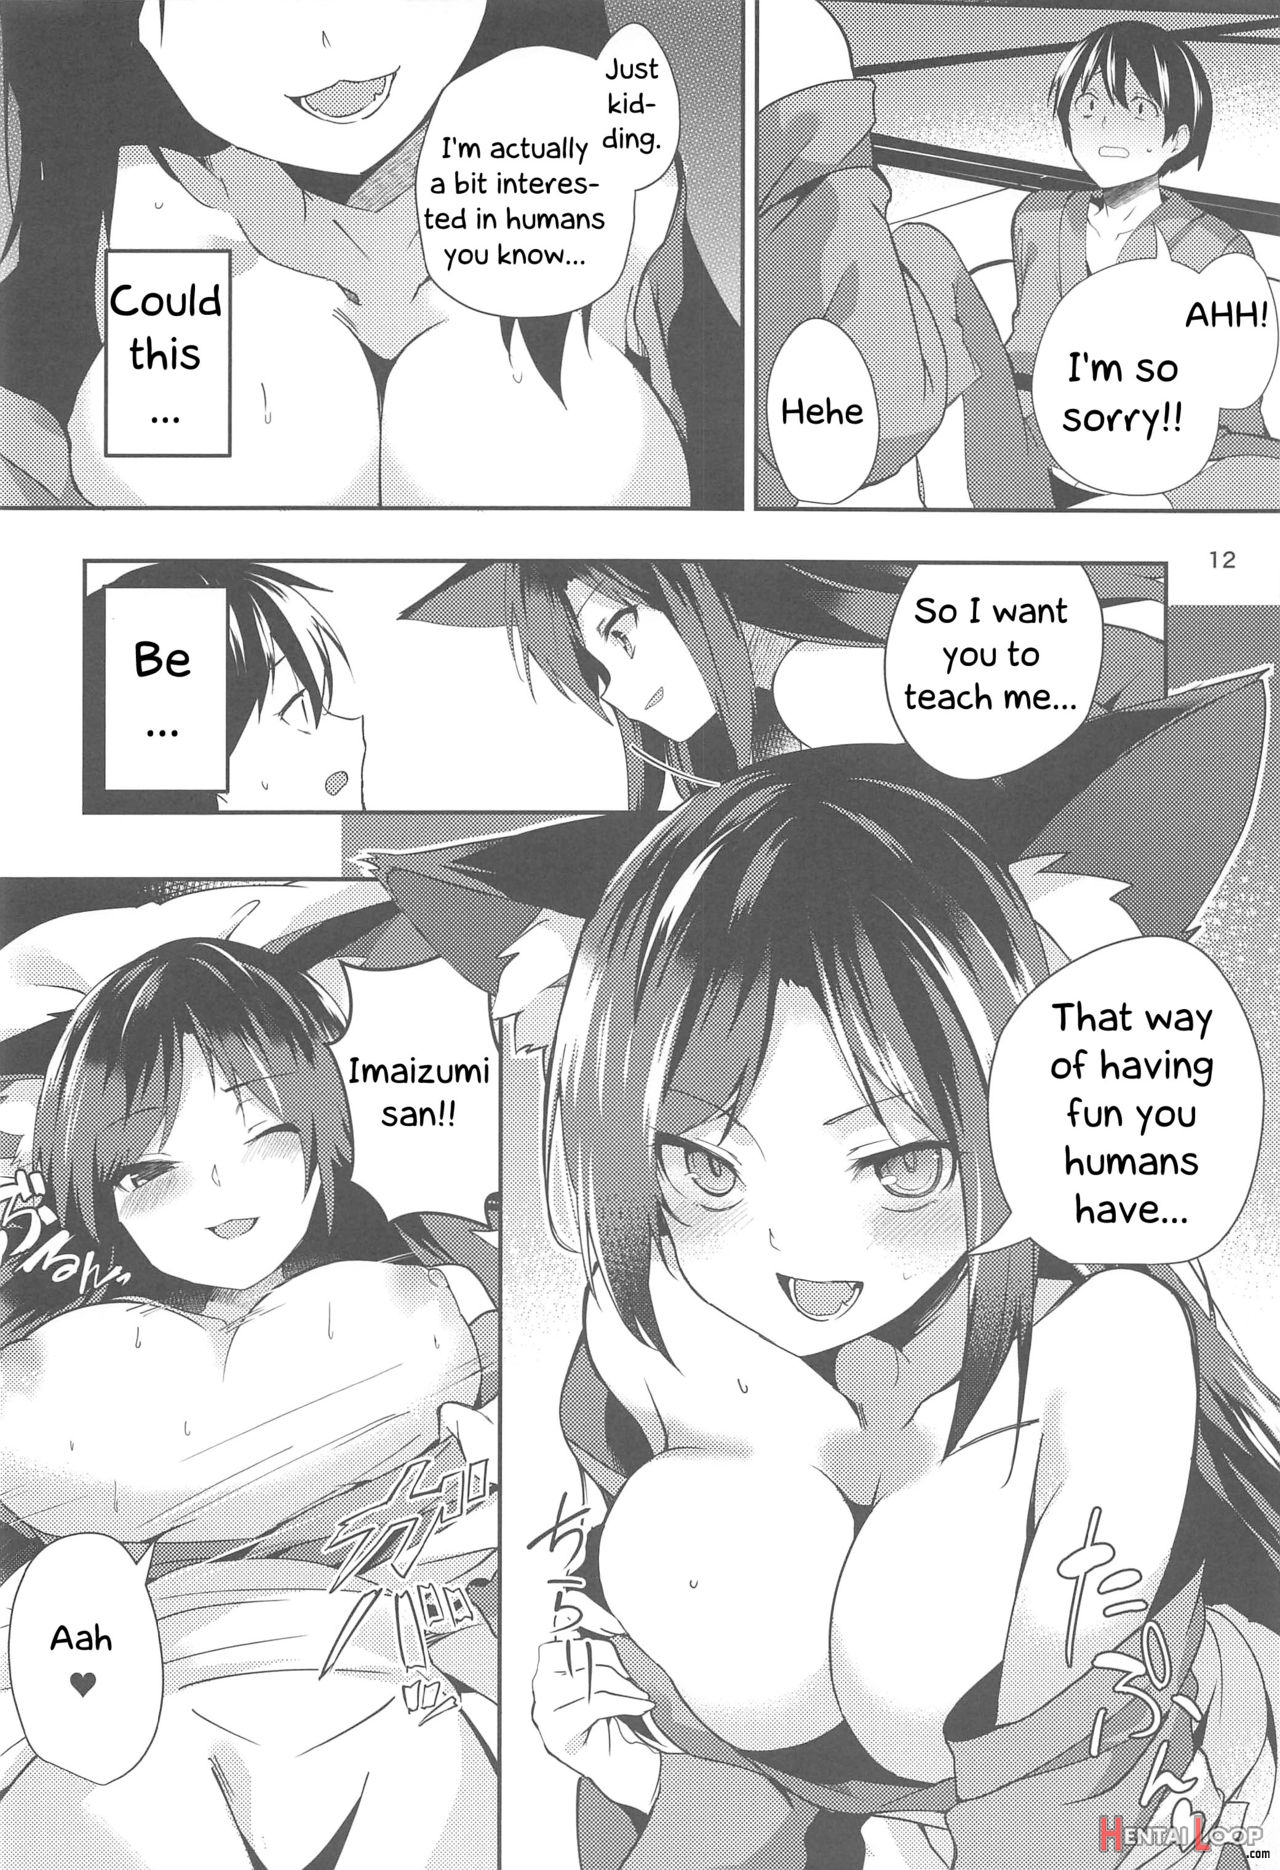 Kagerou's Human Exposure Record page 11